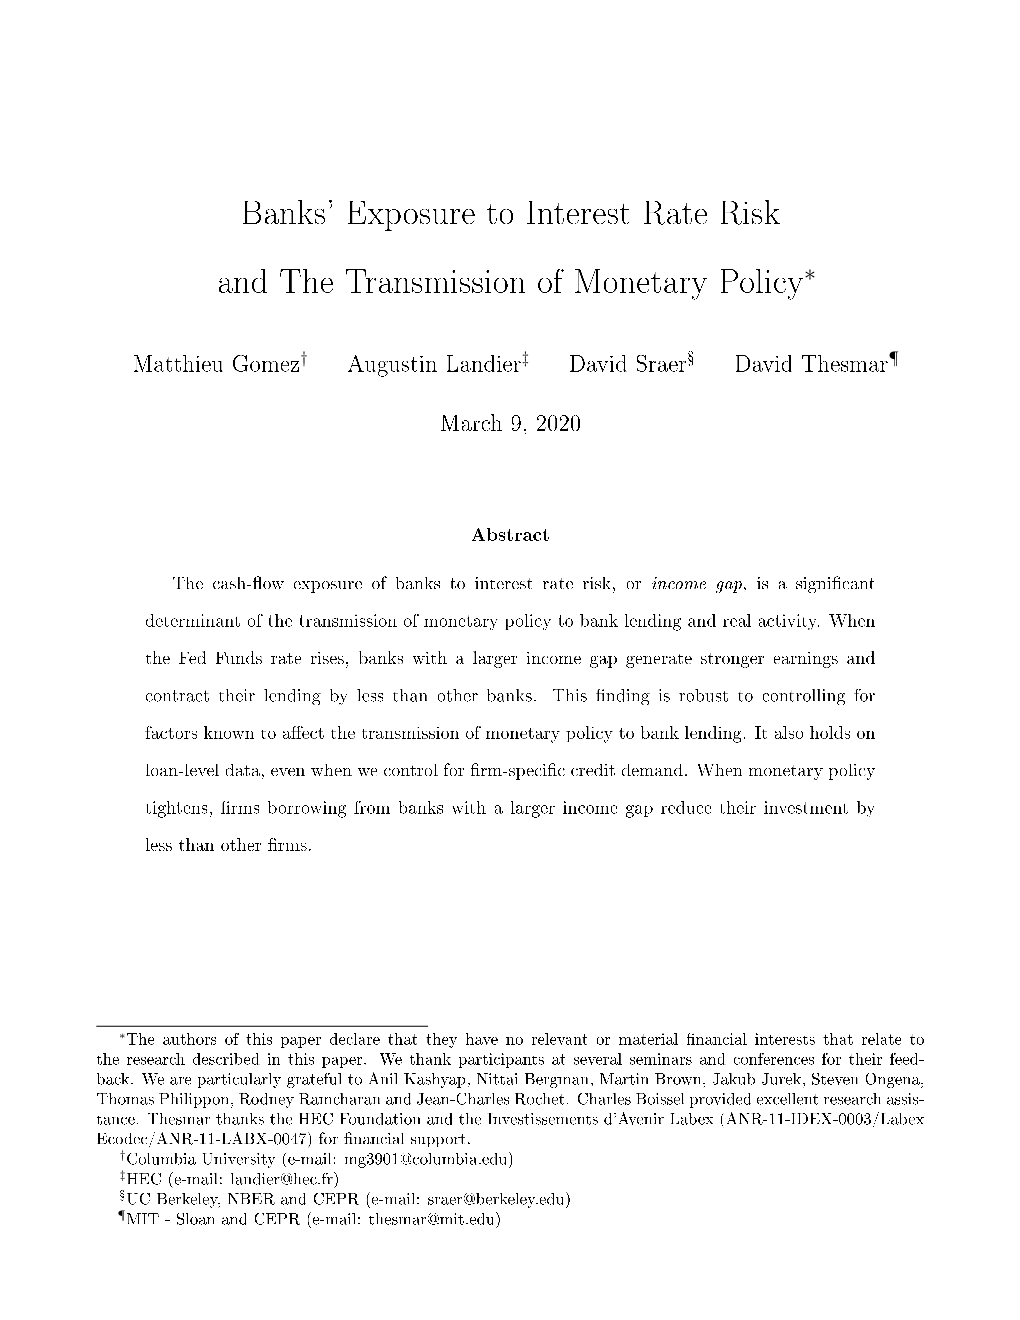 Bank Exposure to Interest-Rate Risk and the Transmission of Monetary